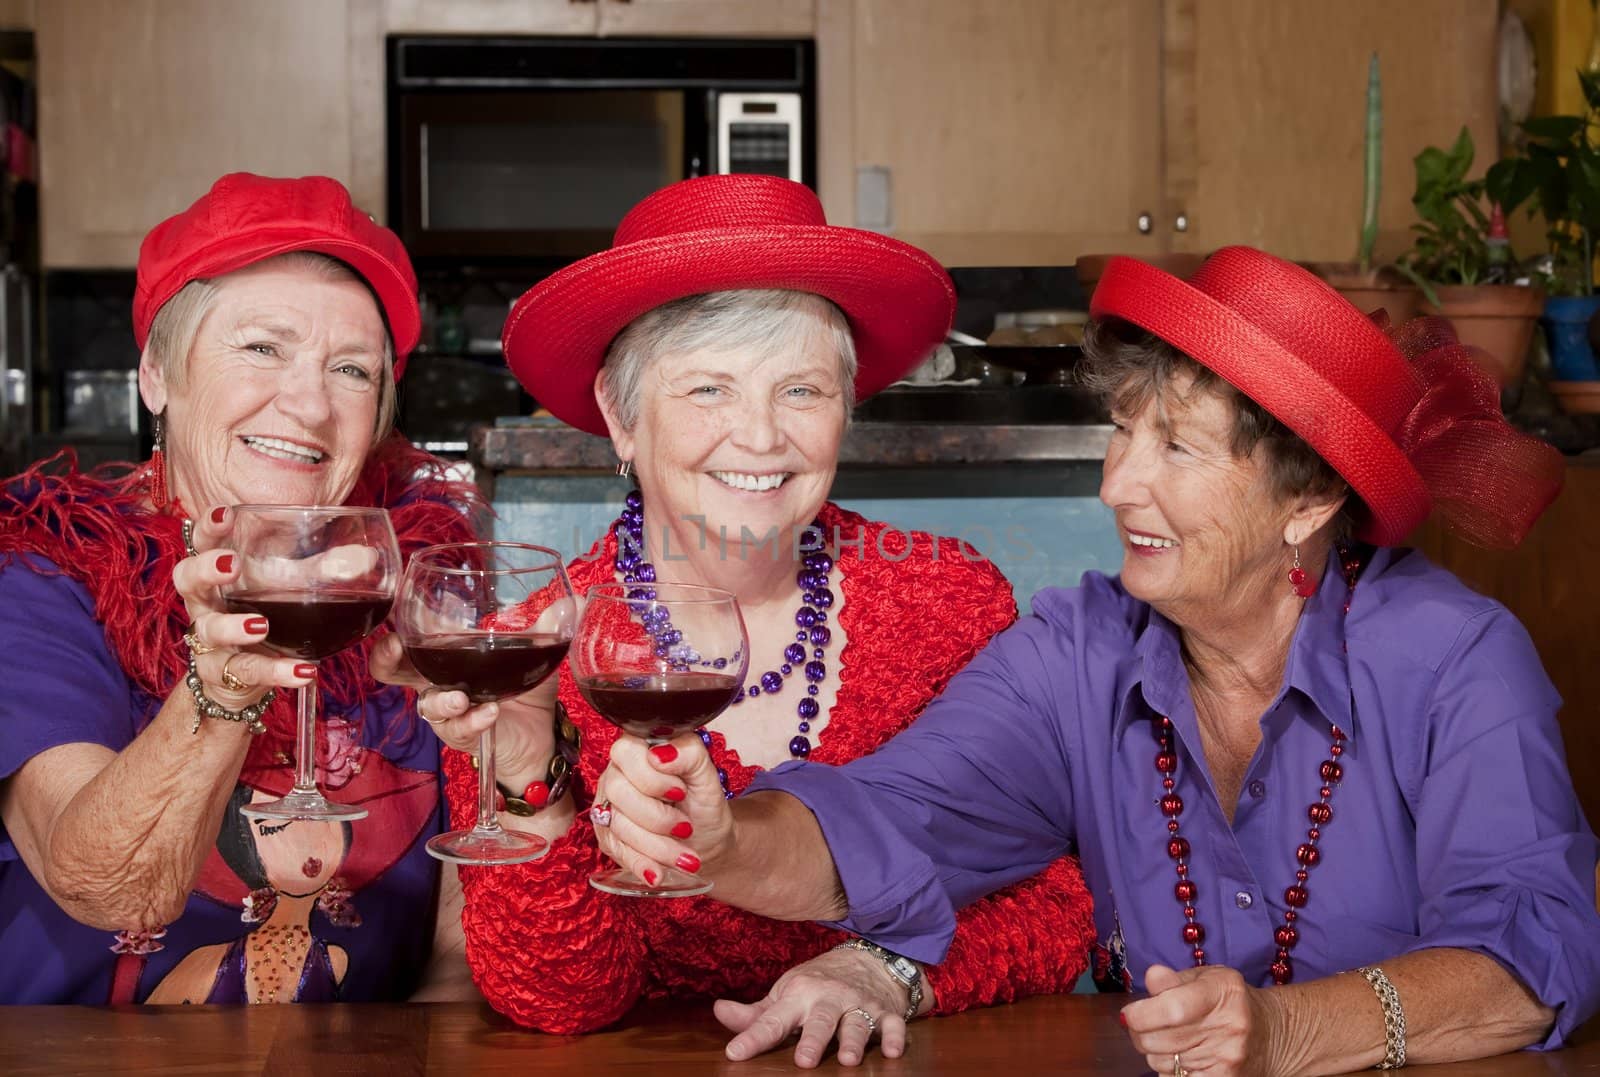 Three red hat ladies toasting with wine by Creatista